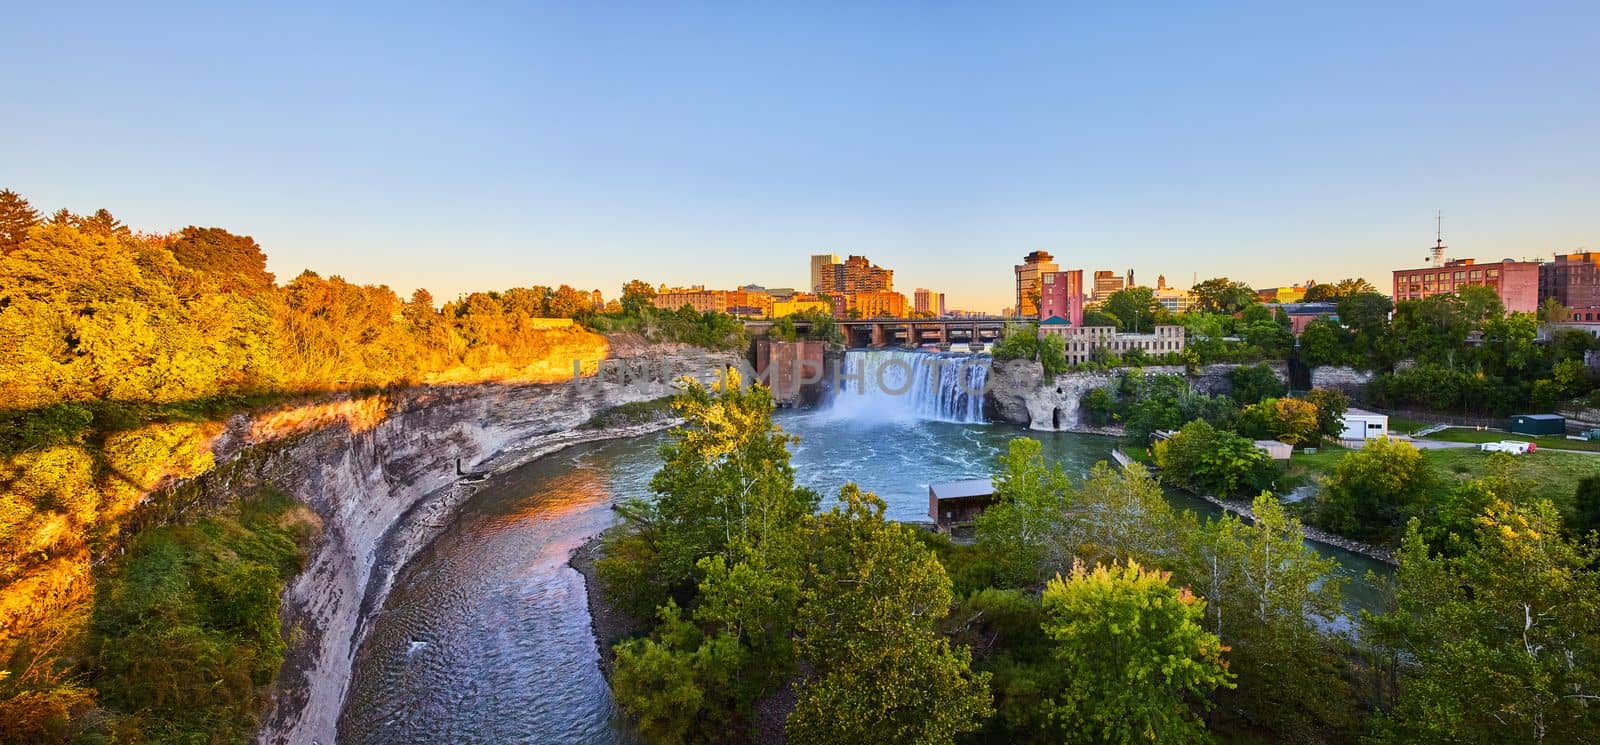 Stunning waterfall at golden hour in city of Rochester New York with downtown in background by njproductions